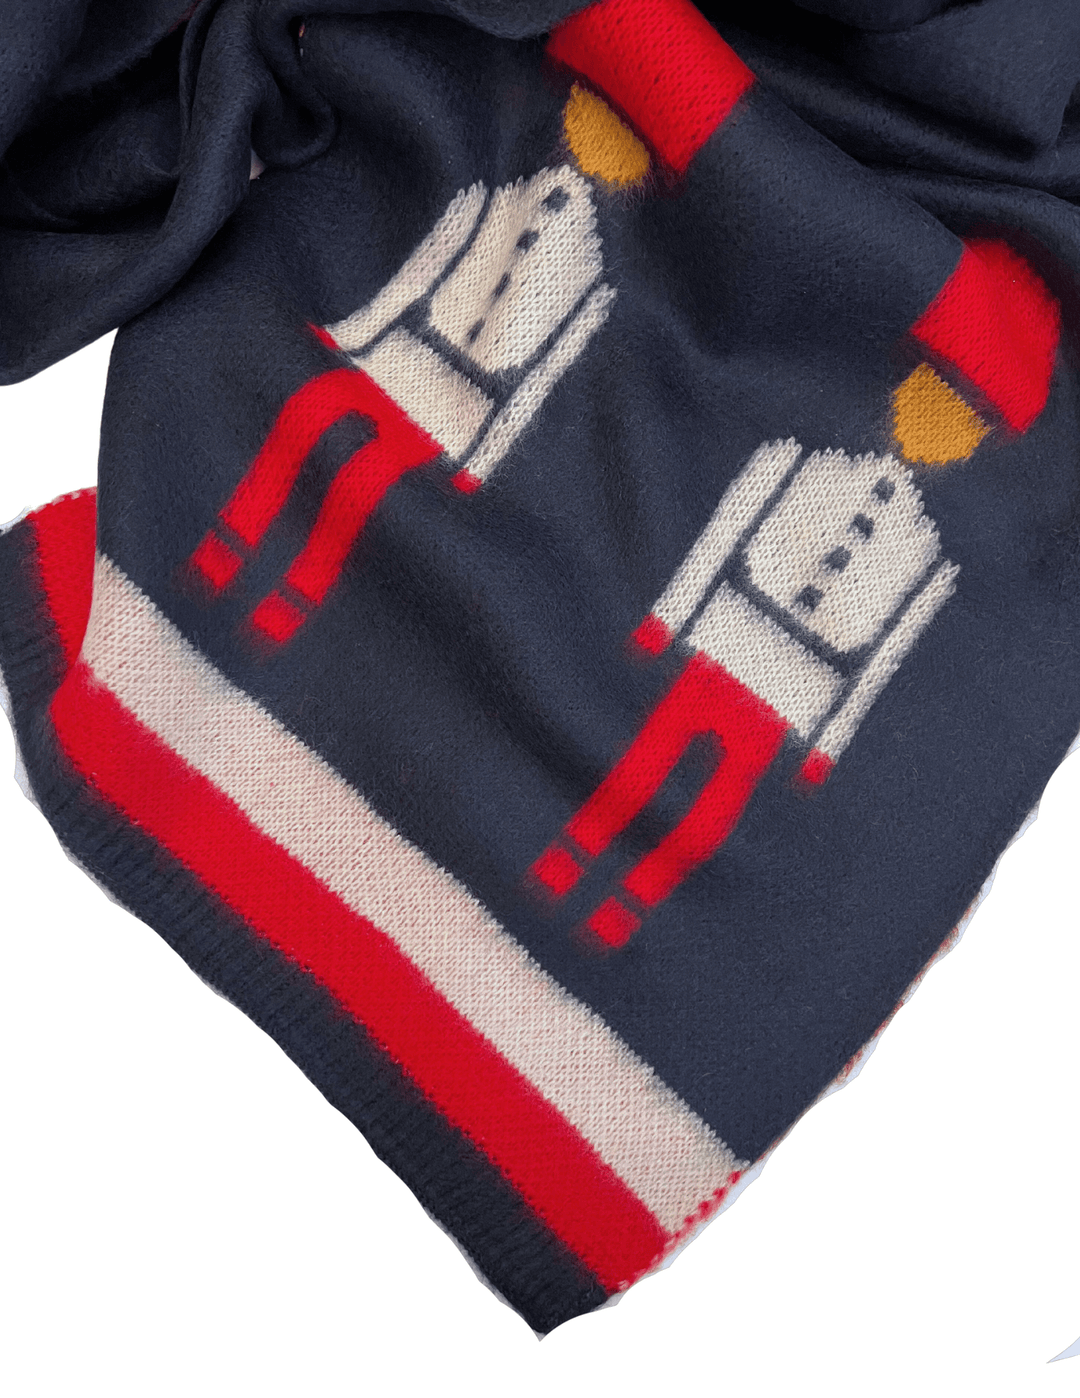 toy soldiers scarf navy red and white tres chic wraps and shawls